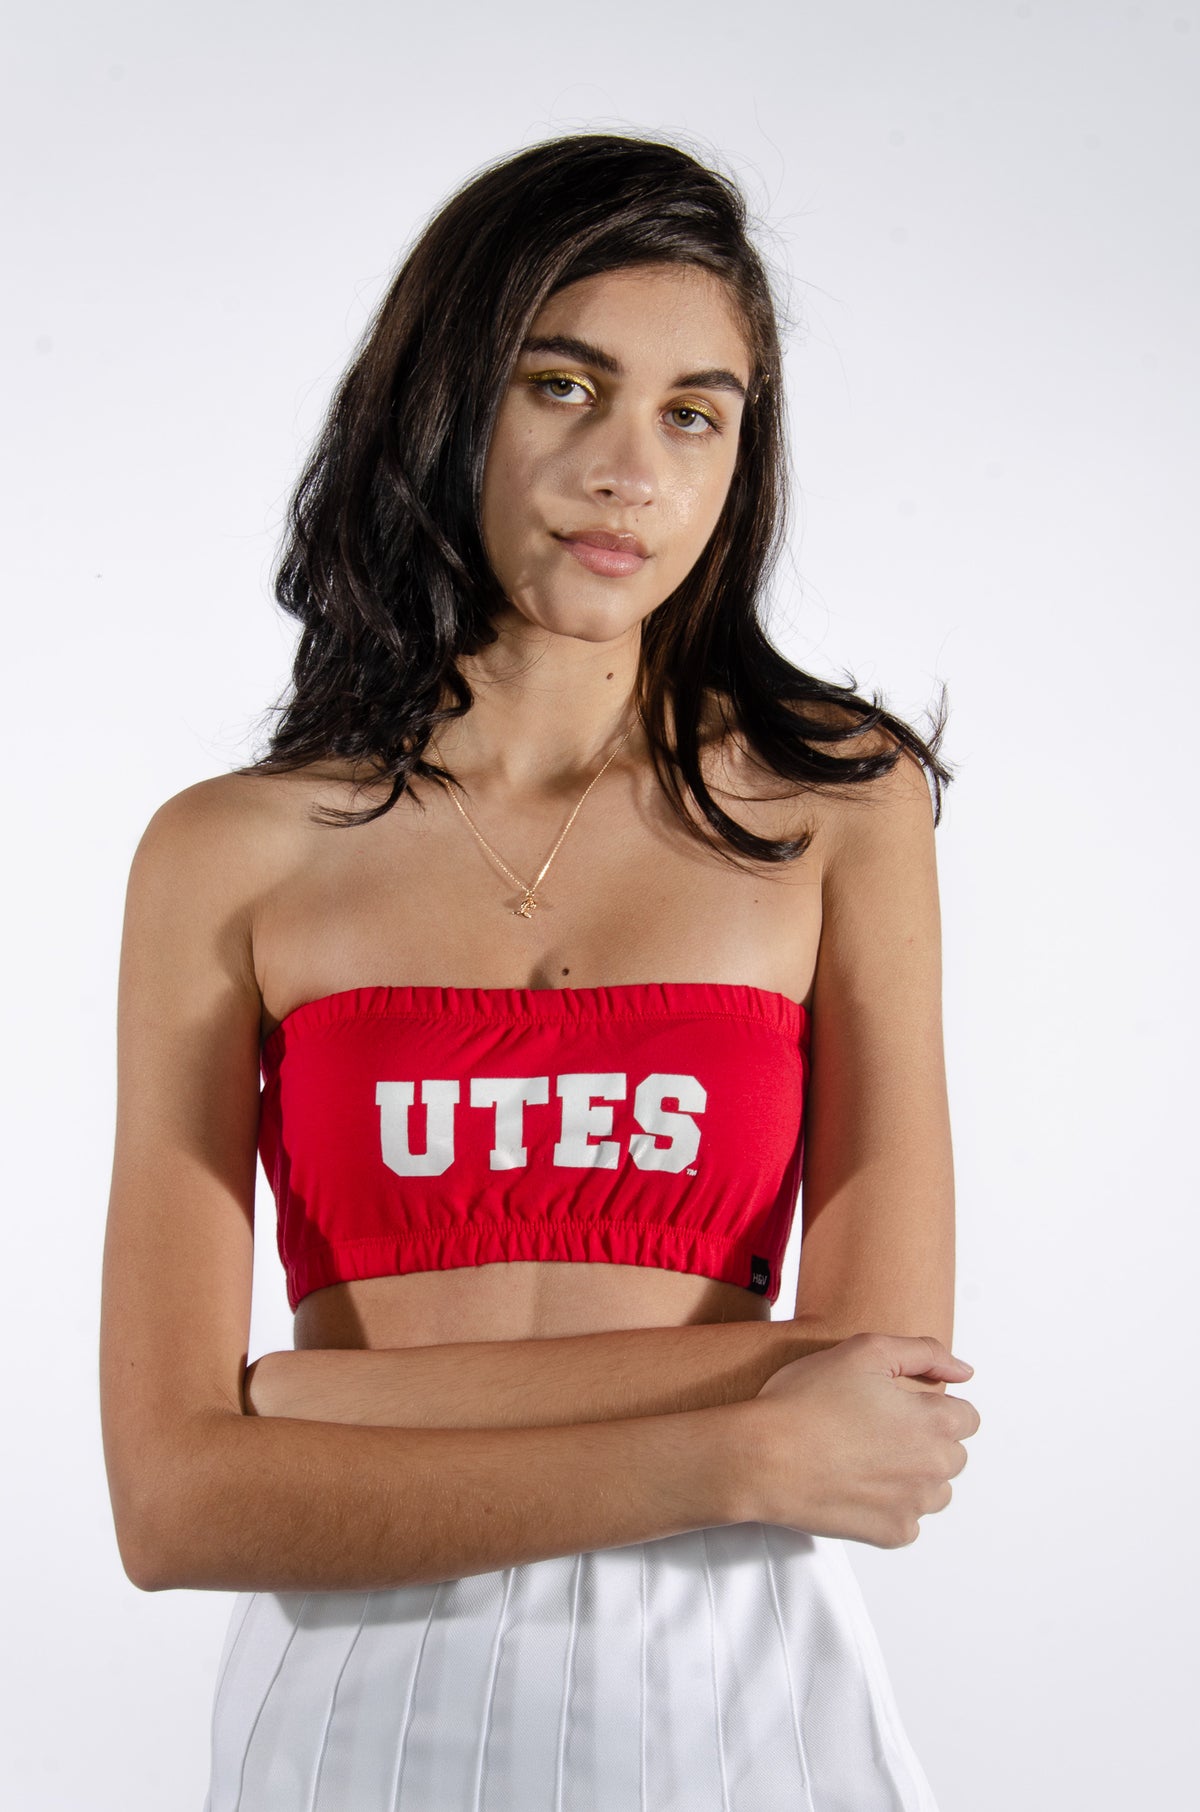 Utah Bandeau Top - Hype and Vice